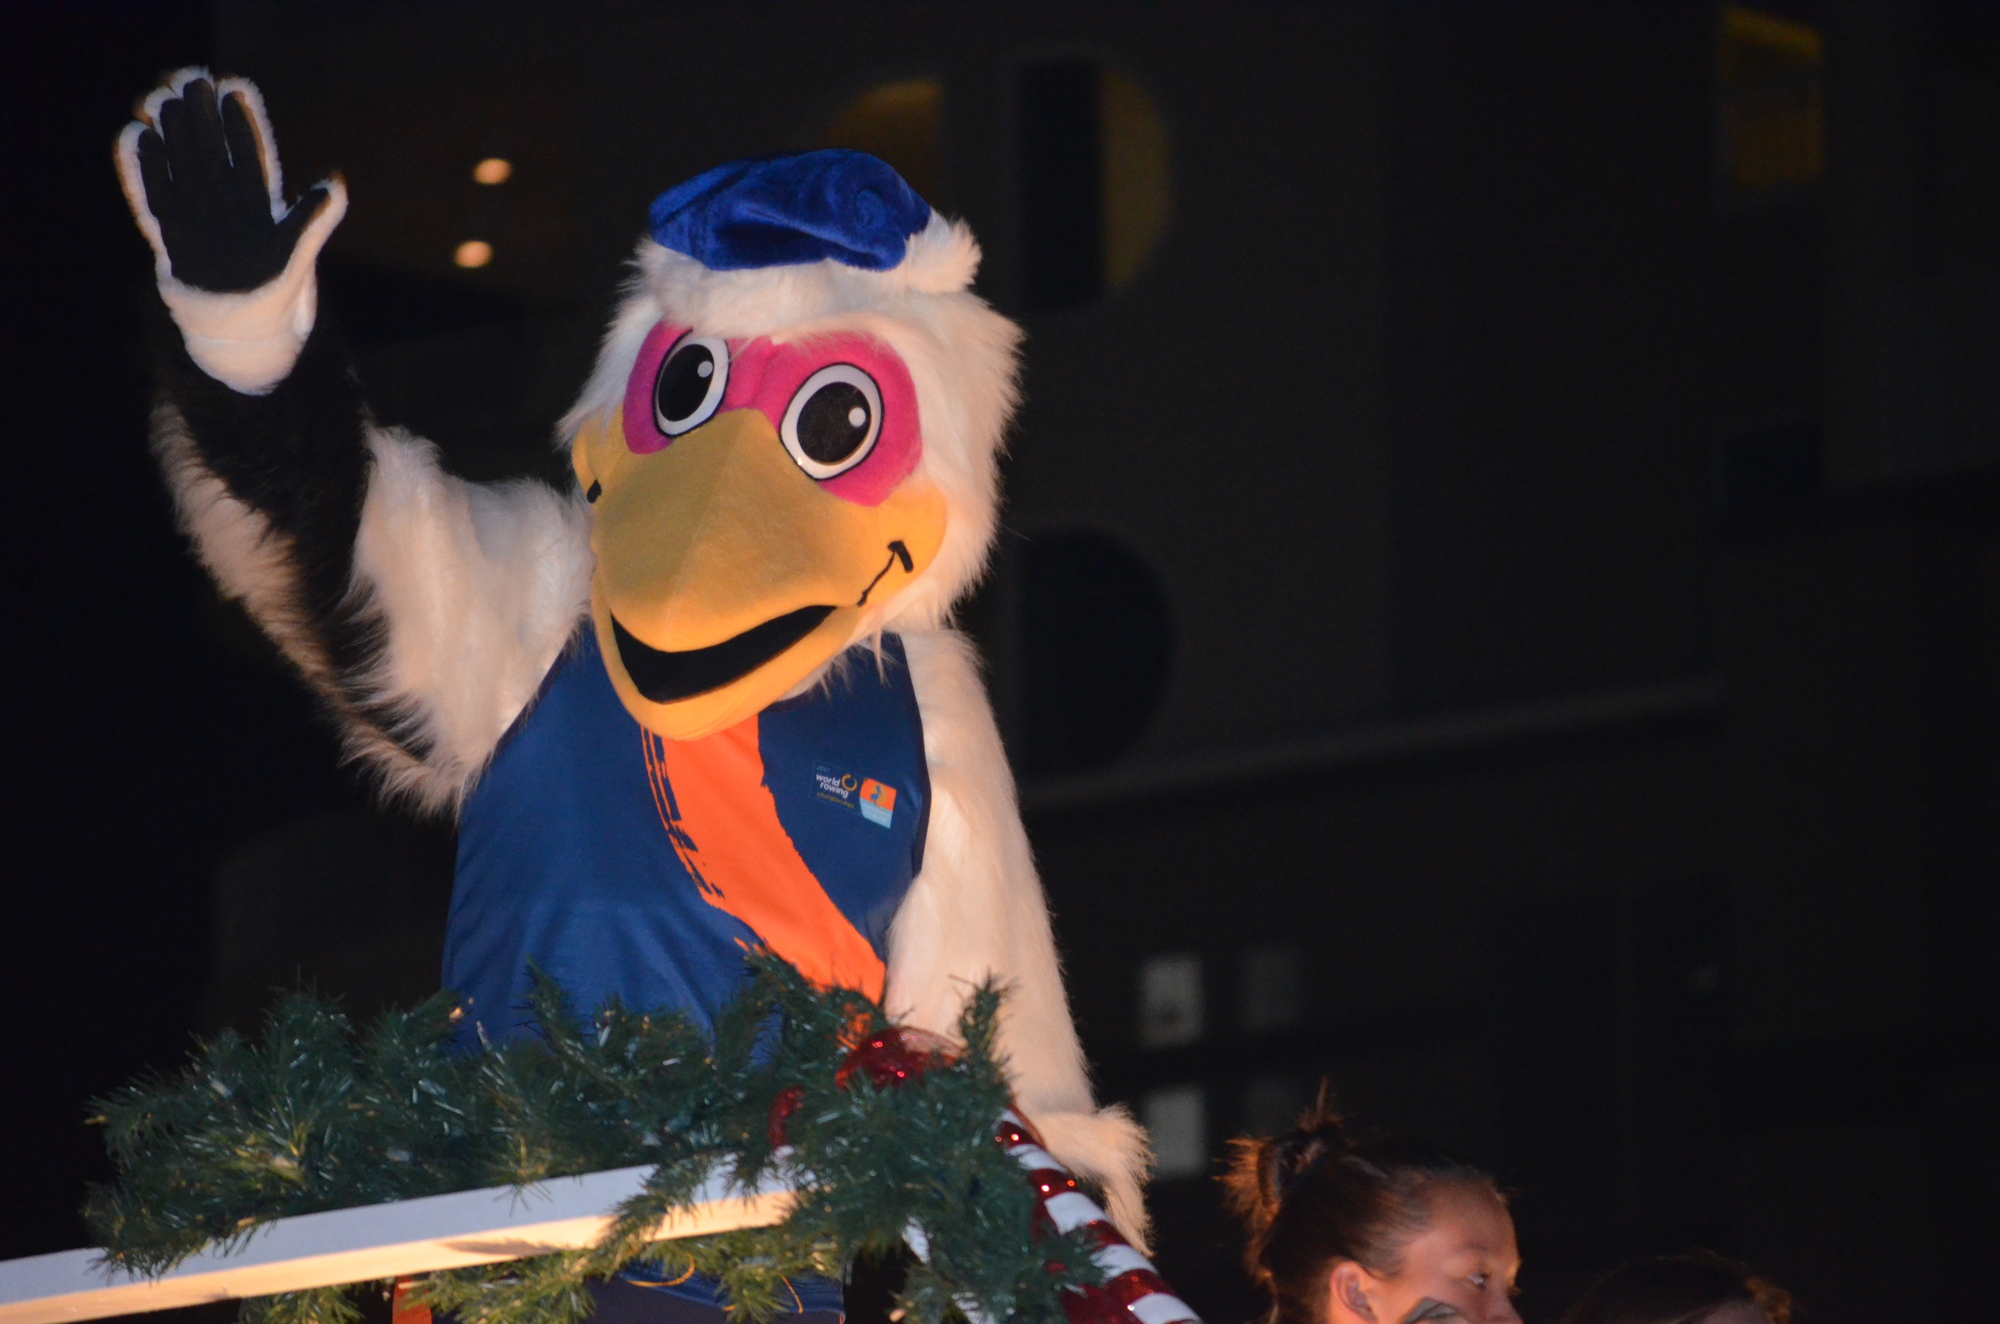 The new nameless pelican mascot for the World Rowing Championships made its first appearance at the Sarasota Holiday Parade.